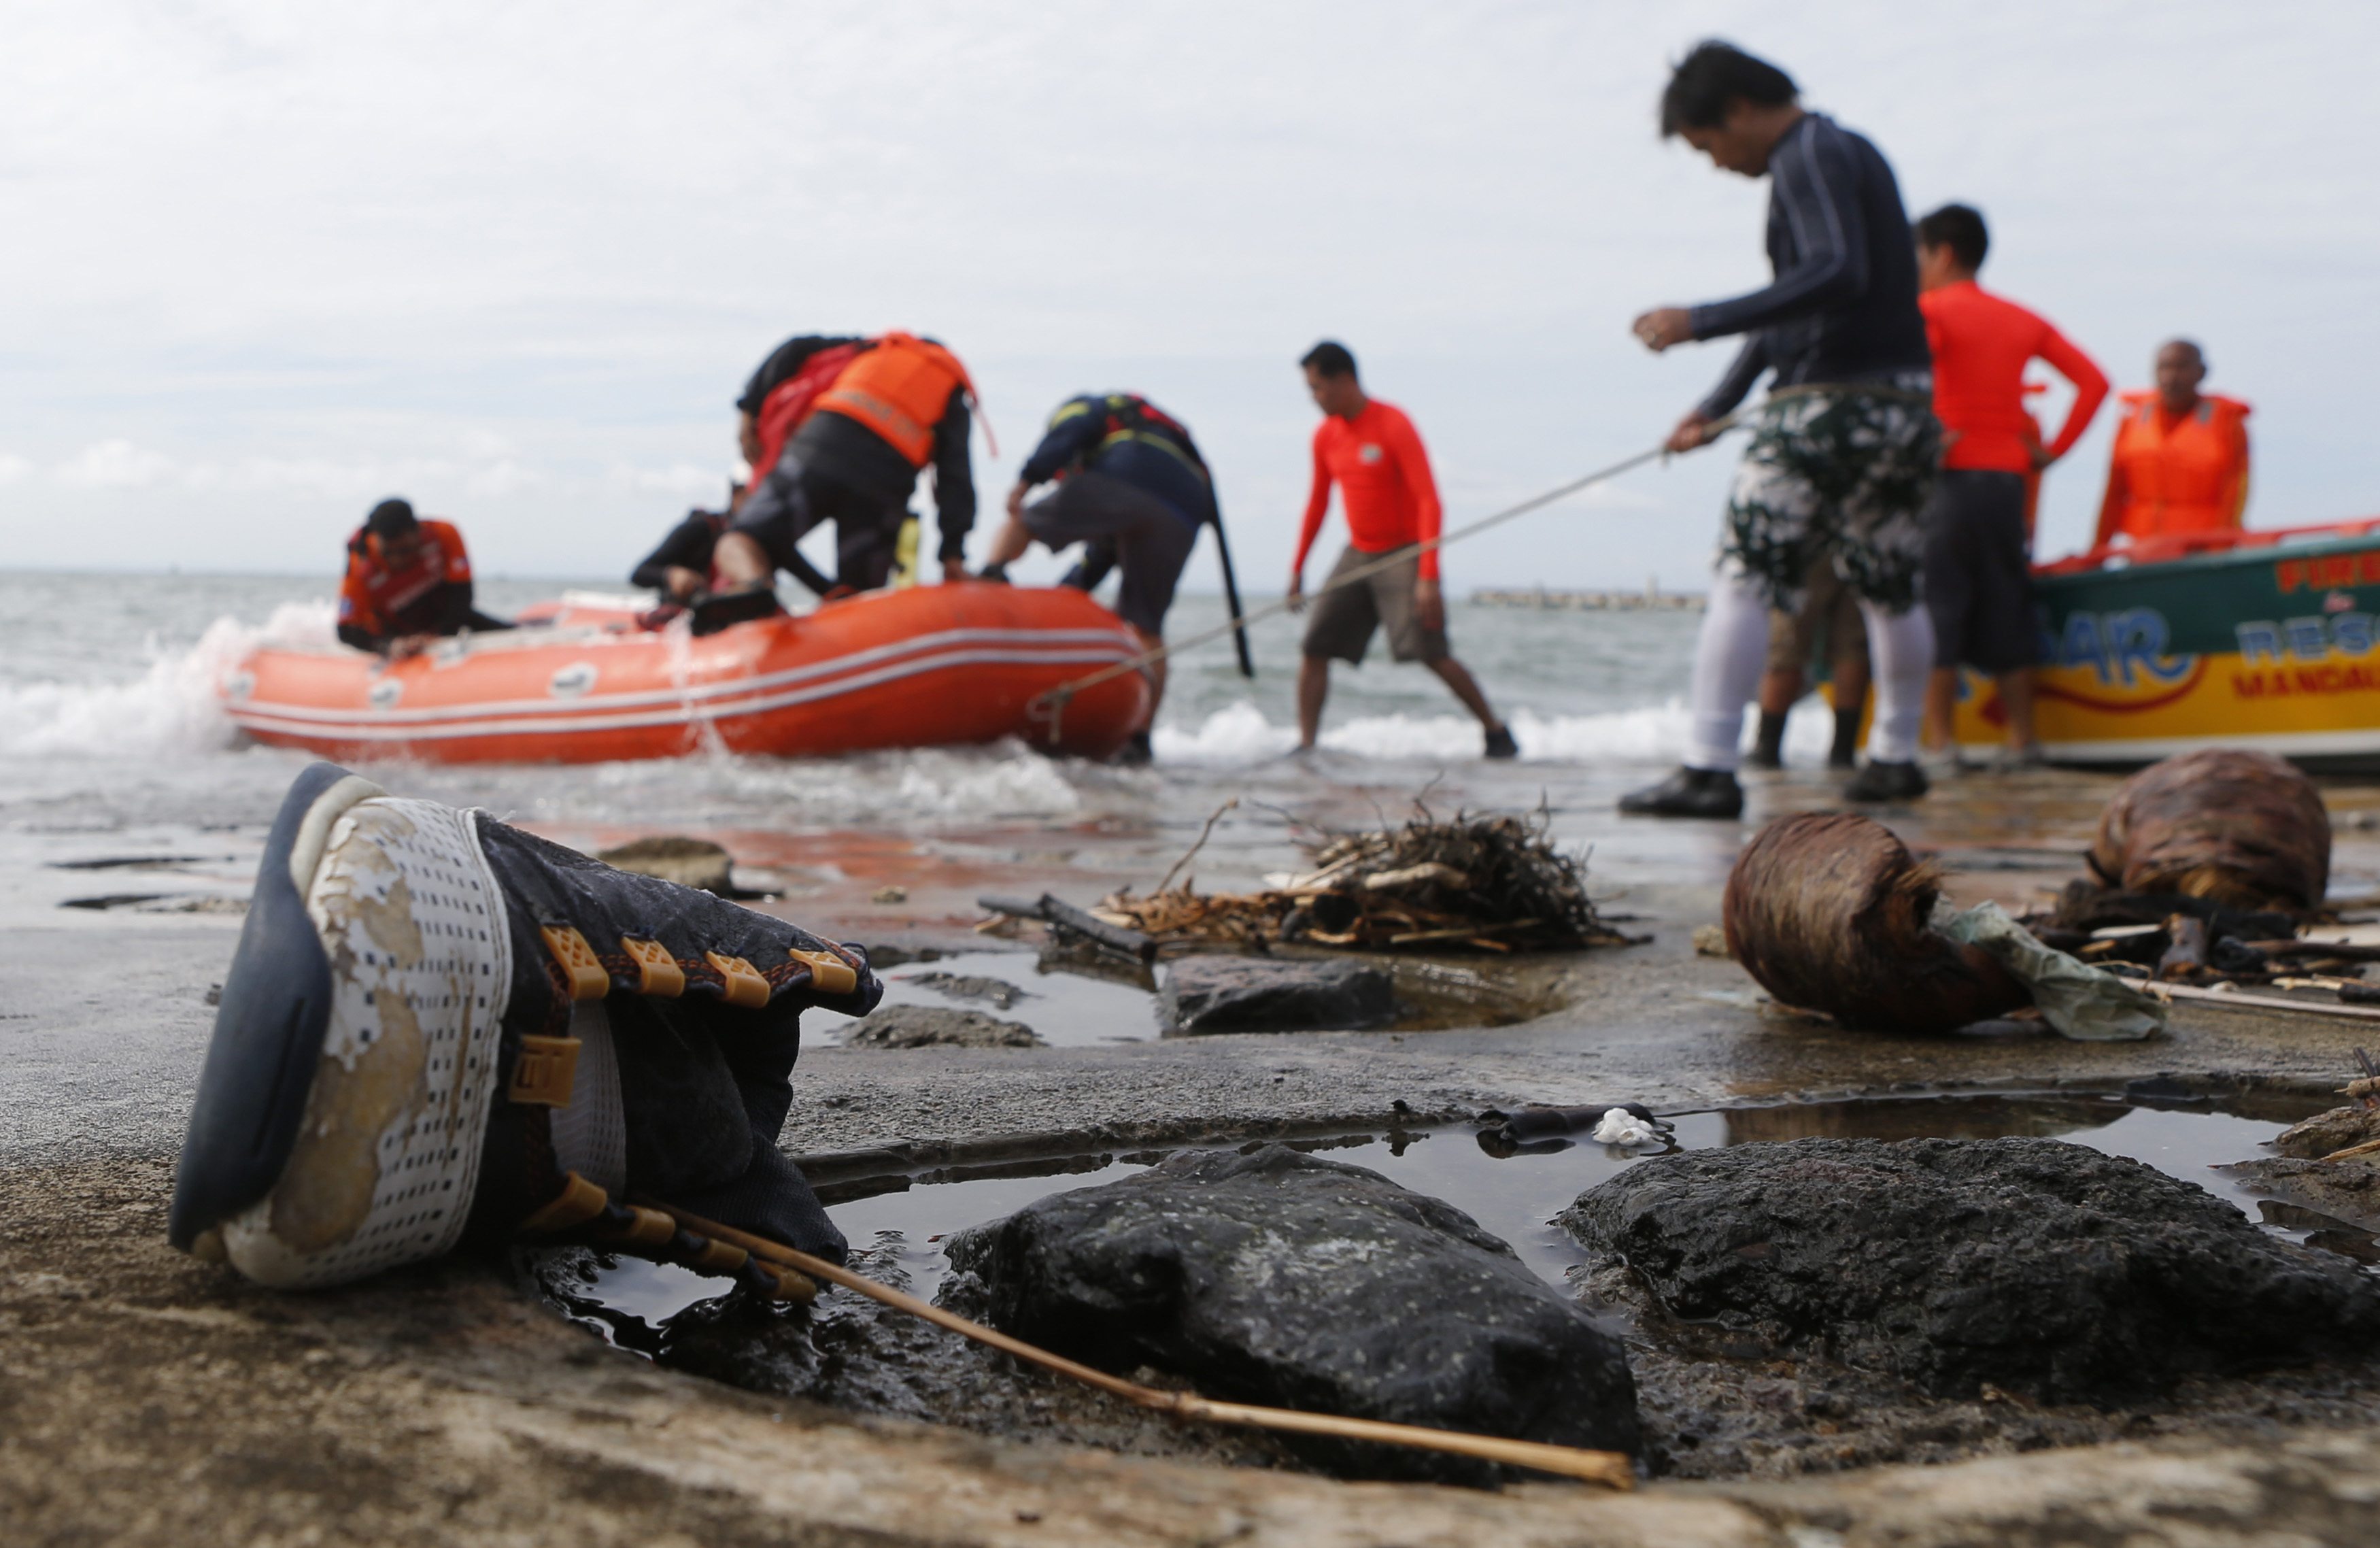 Philippine resume search for ferry disaster survivors